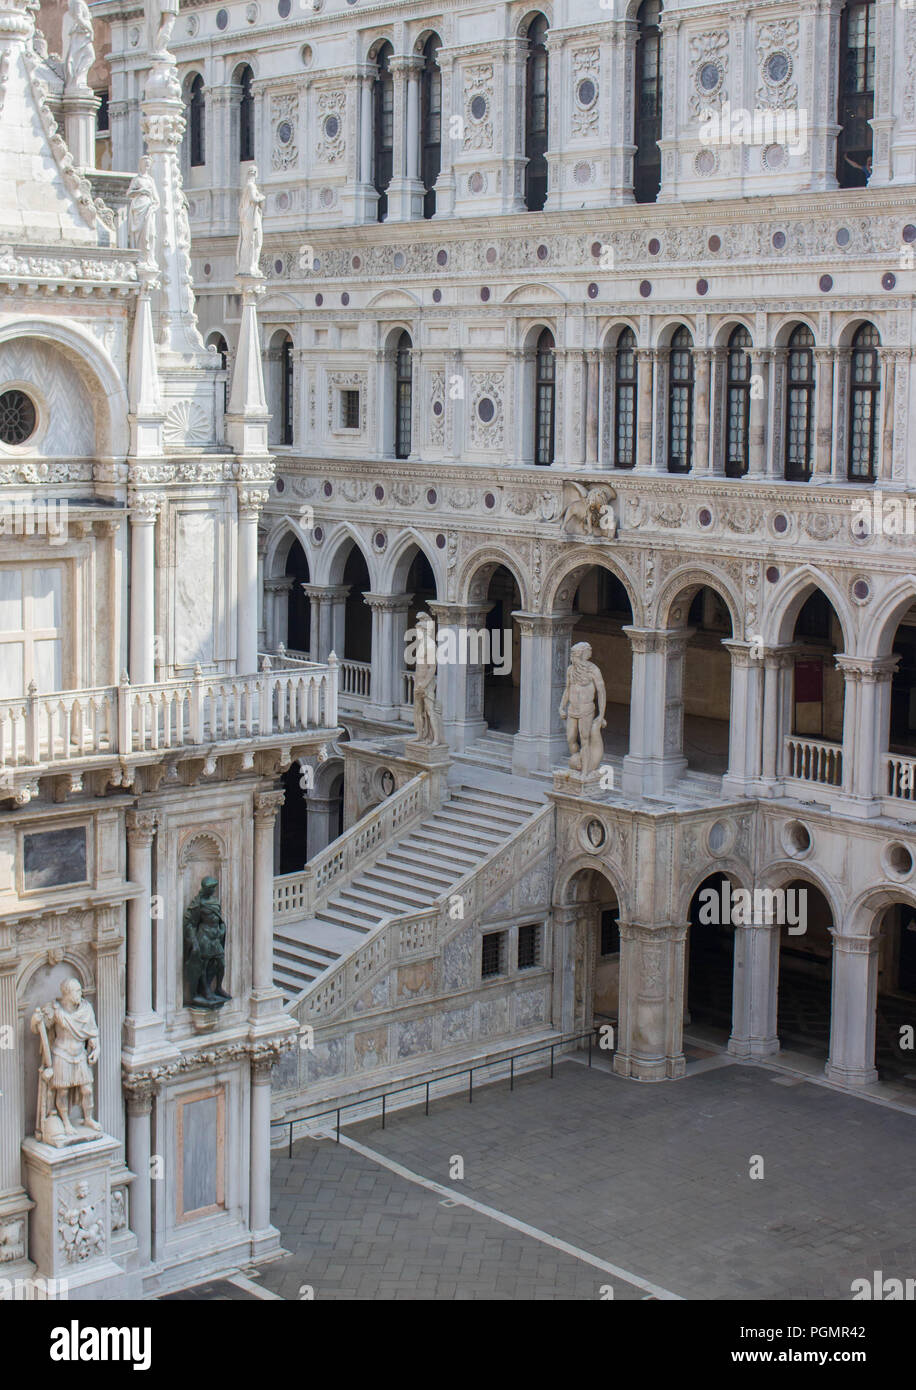 Windows, Stairs and Archways at the Doge's Palace, Venice Stock Photo